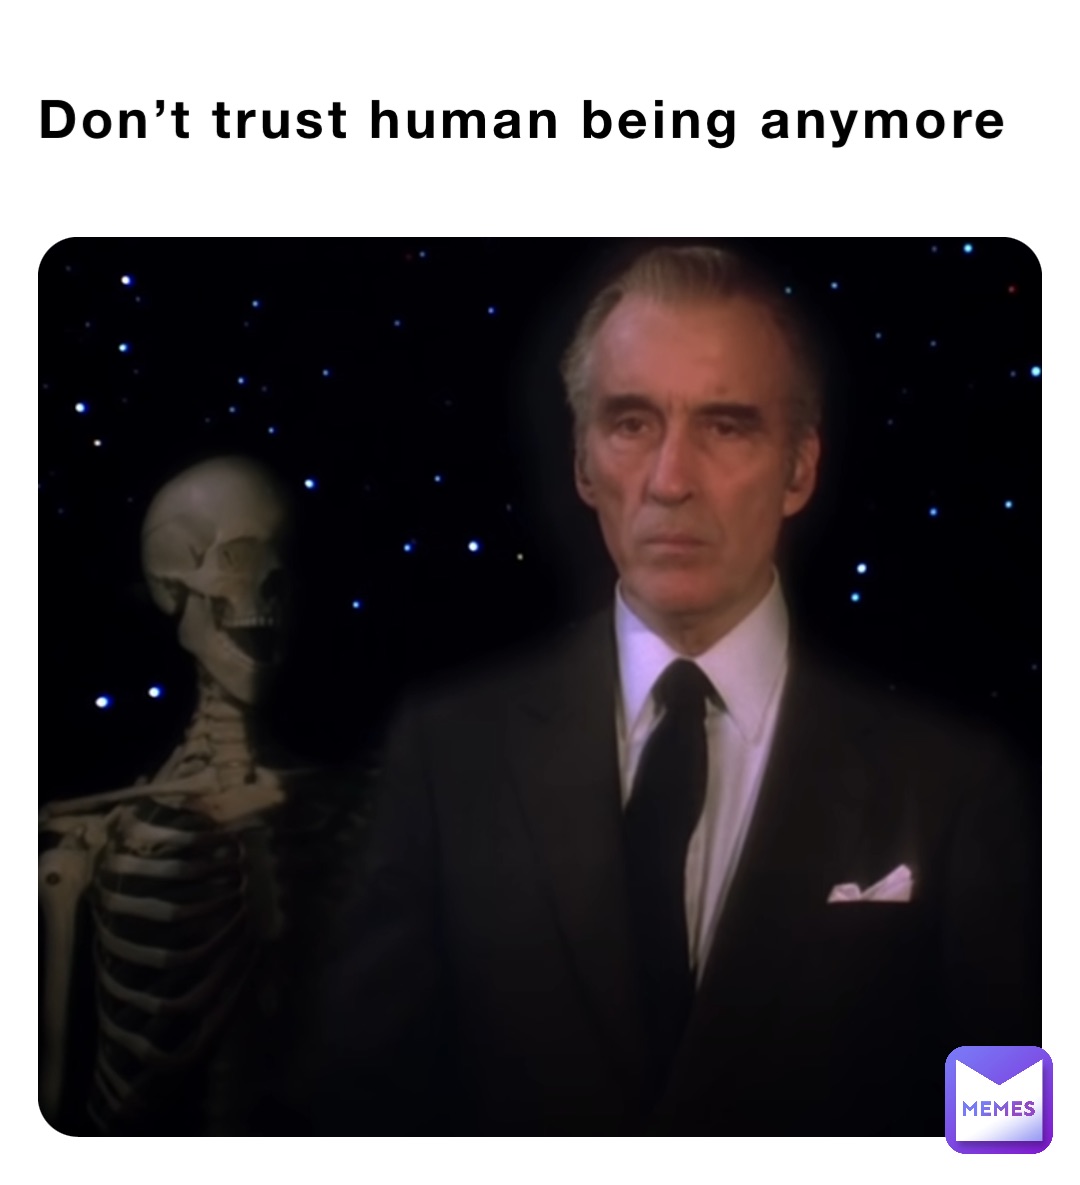 Don’t trust human being anymore